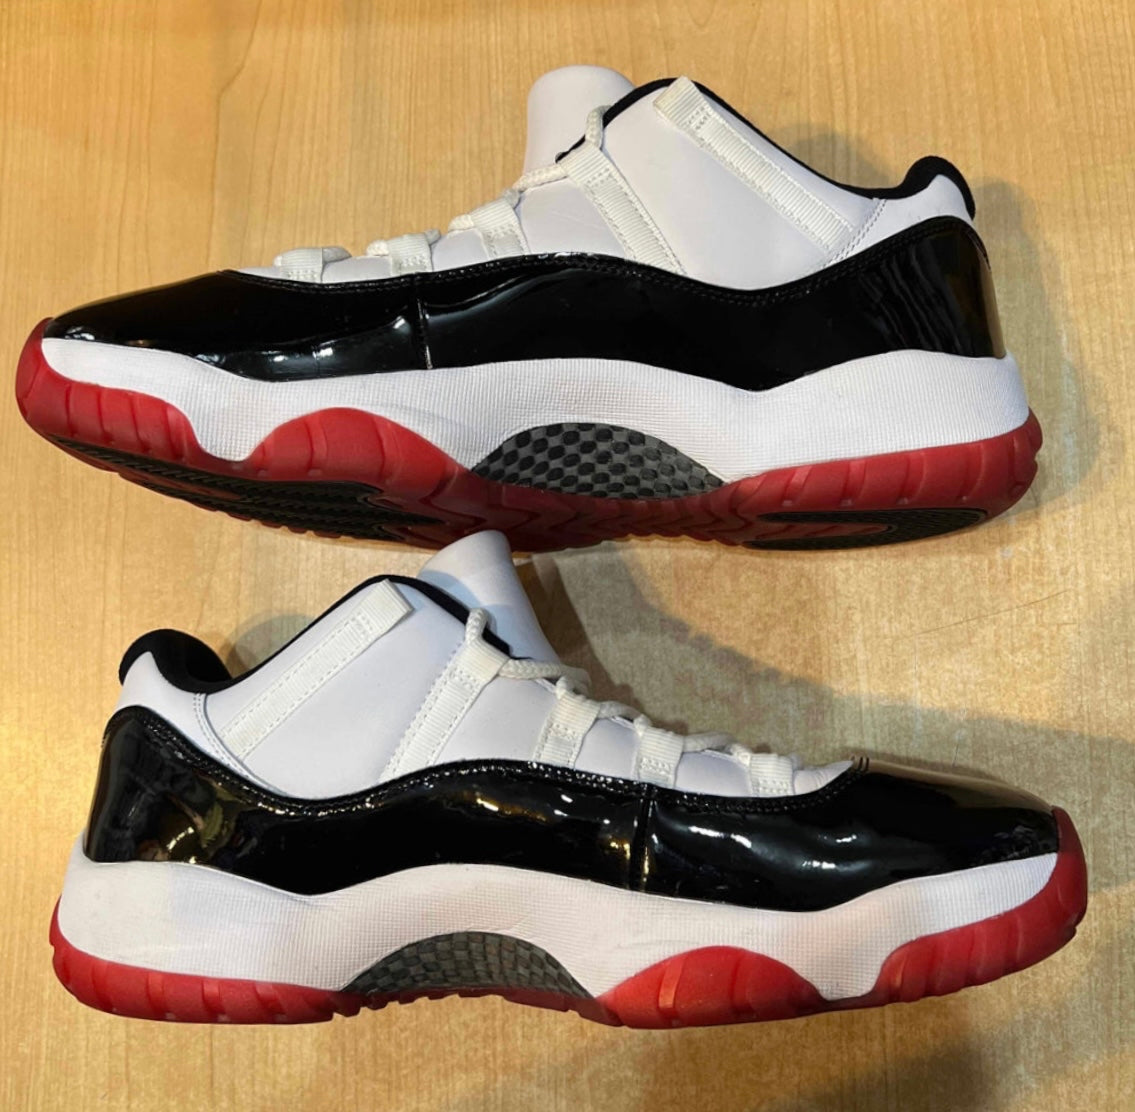 Concord Bred Low 11s Size 11.5